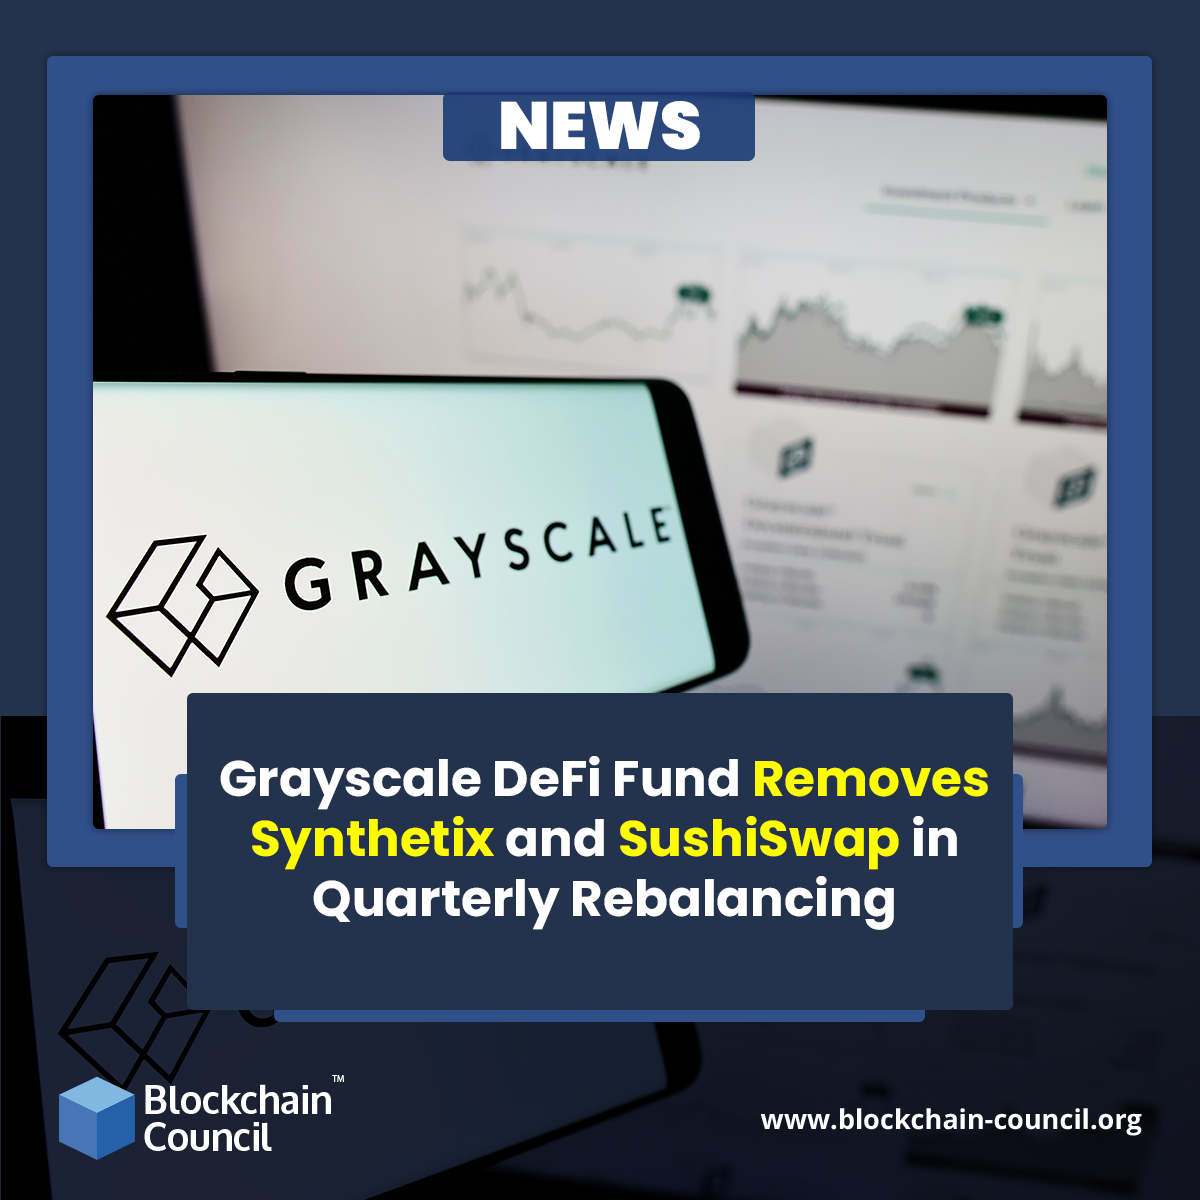 Grayscale DeFi Fund Removes Synthetix and SushiSwap in Quarterly Rebalancing